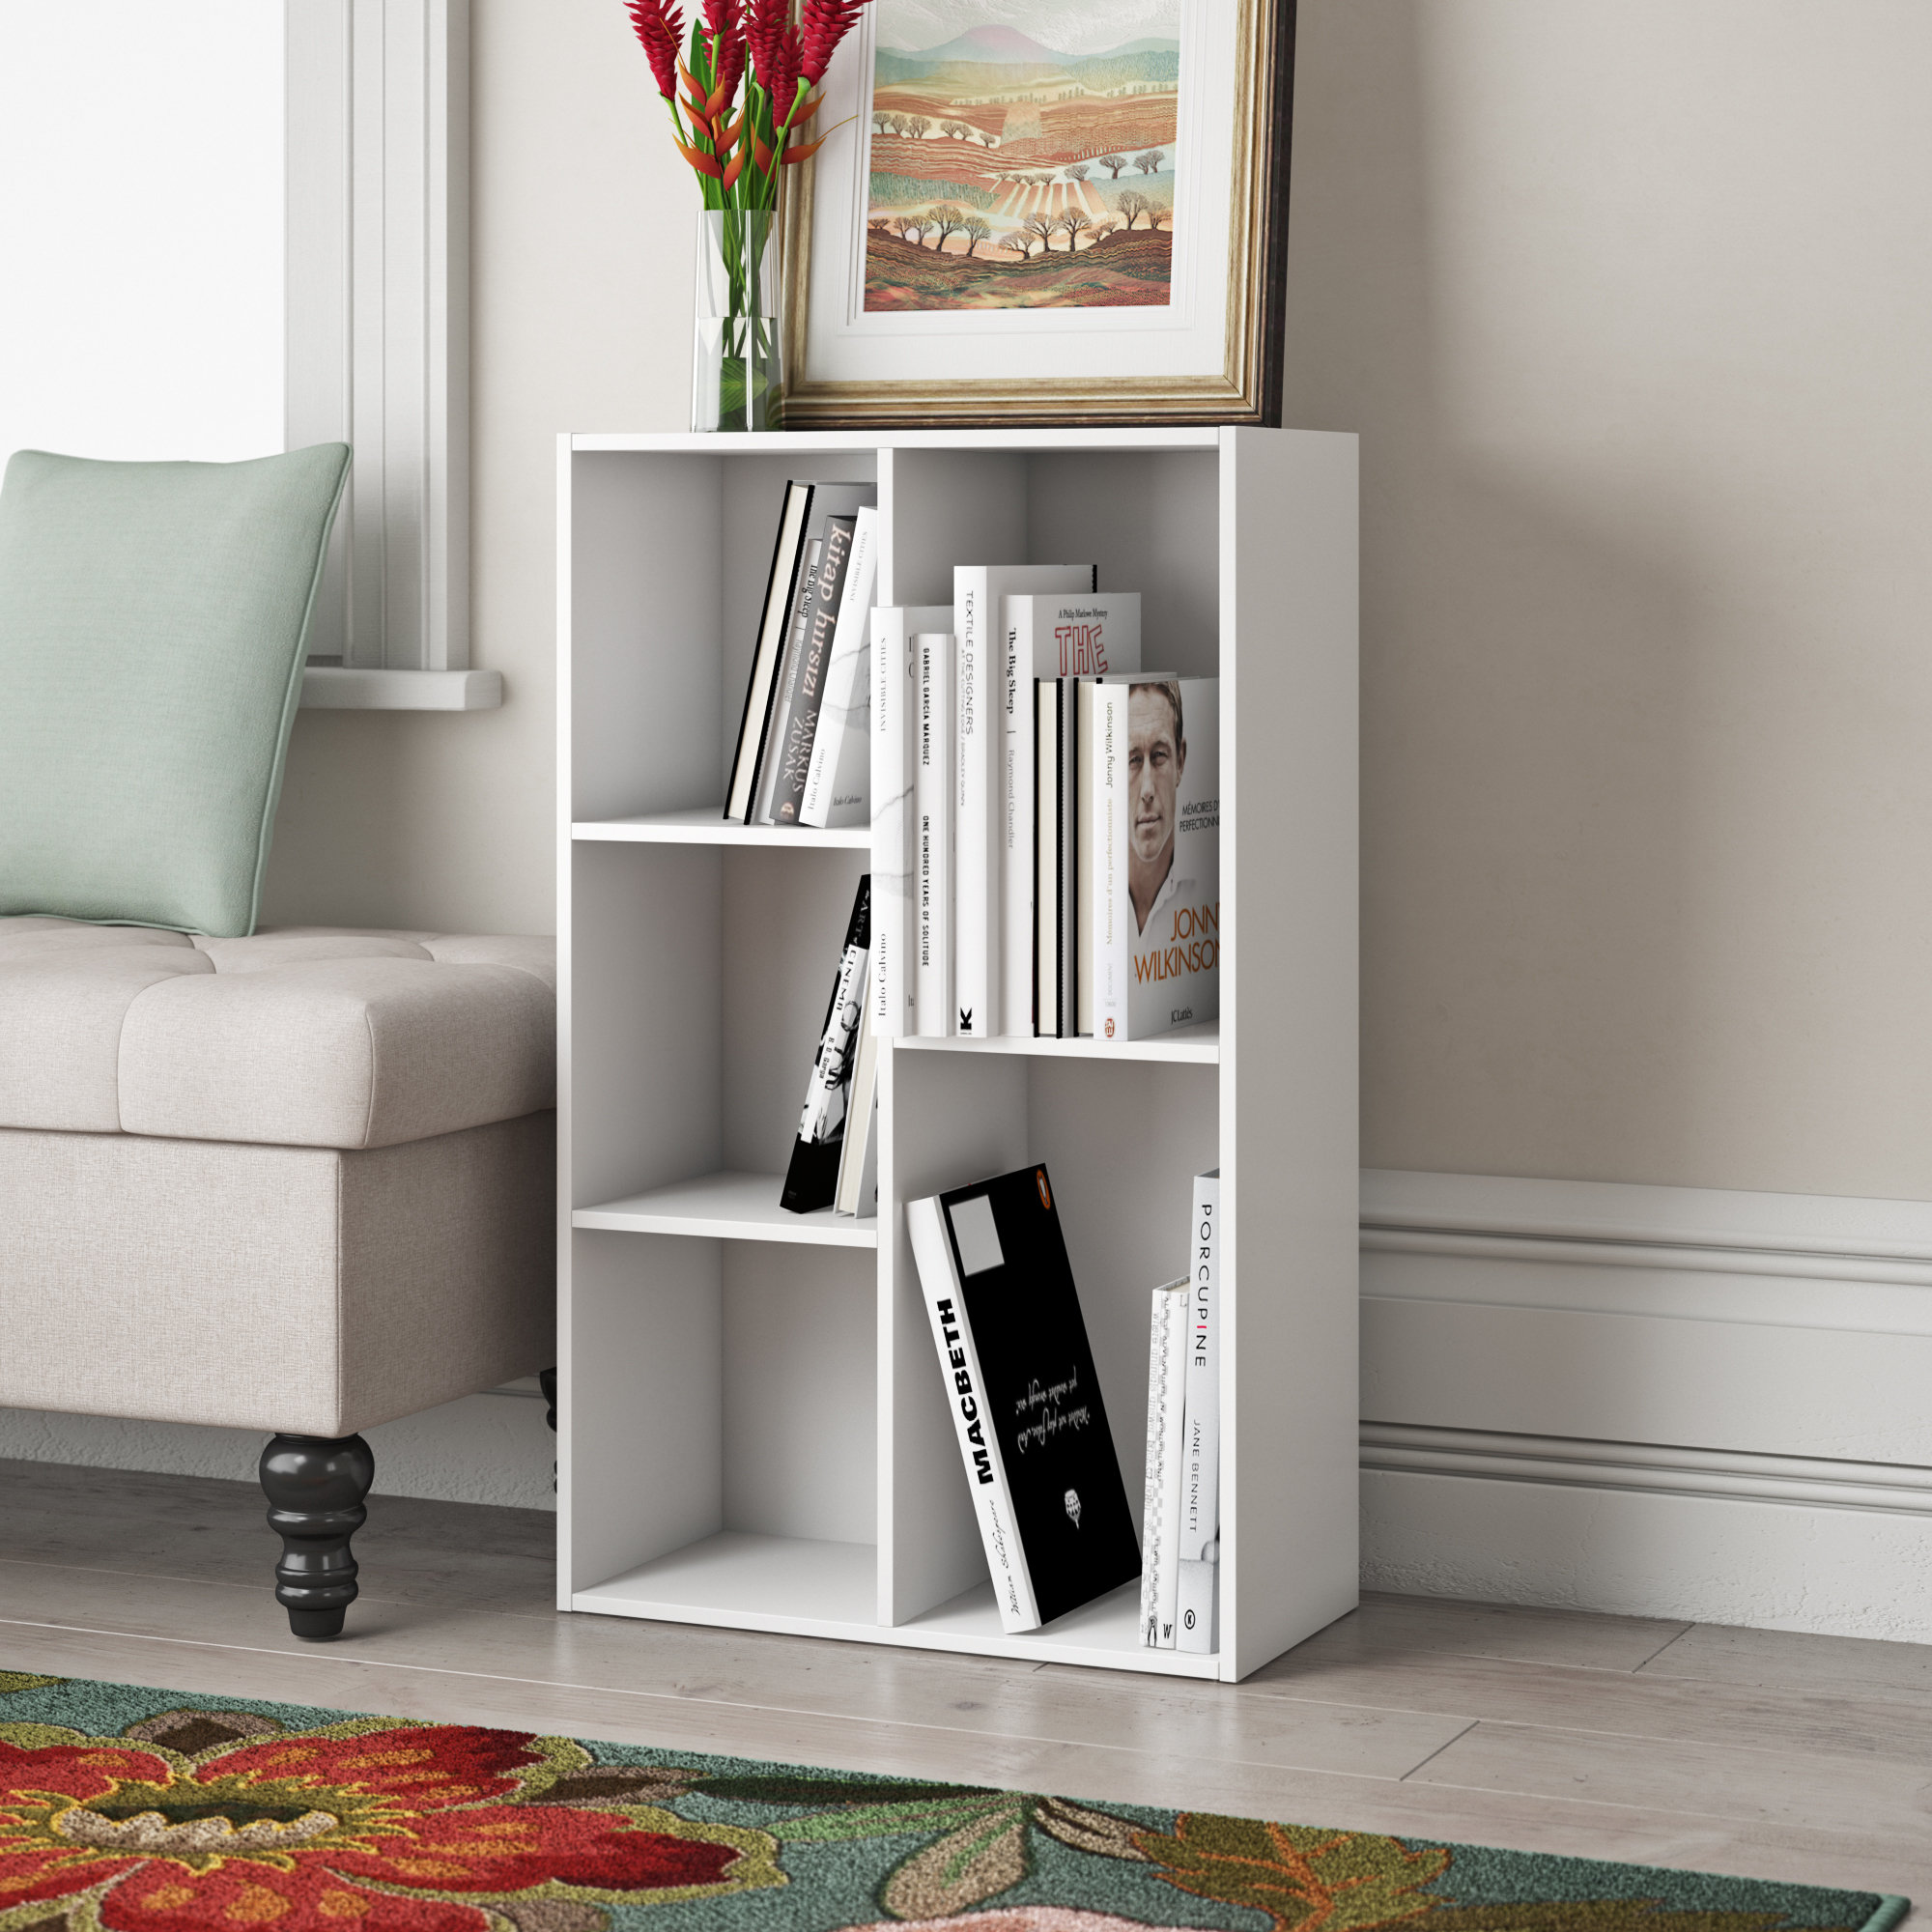 2-Tier Bookshelf for Small Spaces,Book Storage Organizer Case Open Shelves Bedside Cabinet for Storing Books,Toys and Daily Necessities,in The Living Room Office Bedroom Bookcase,Small Bookshelf 